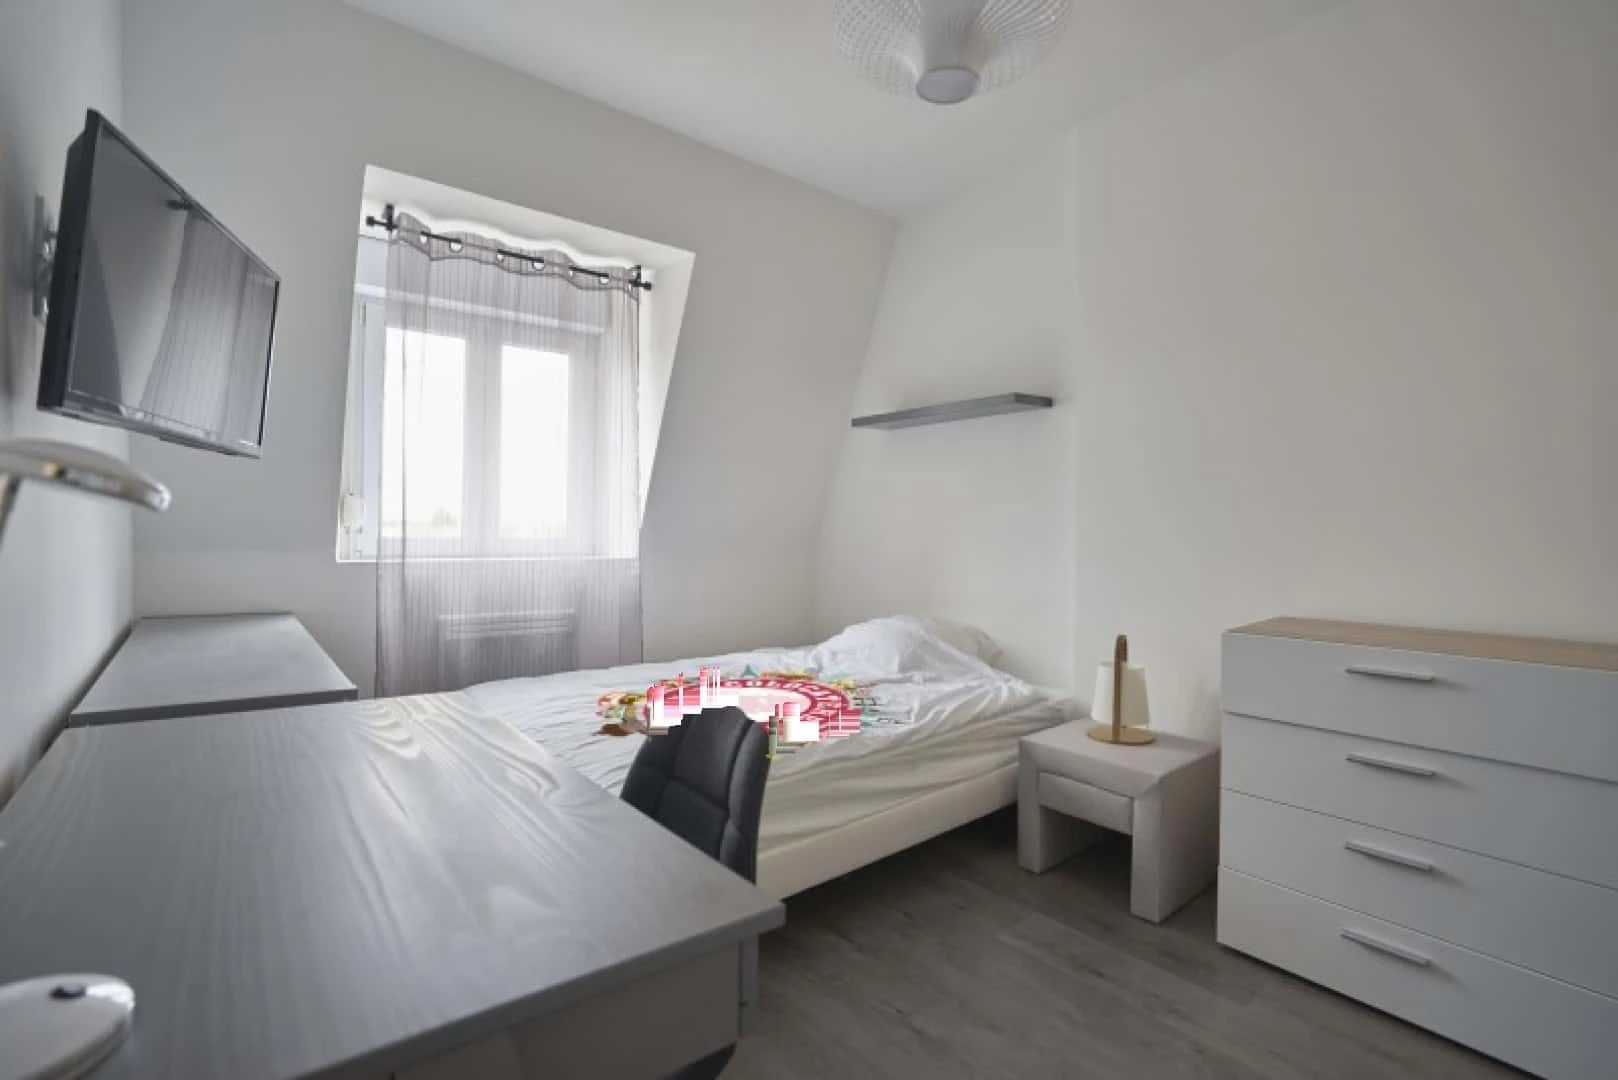 Room for rent with double bed Reims